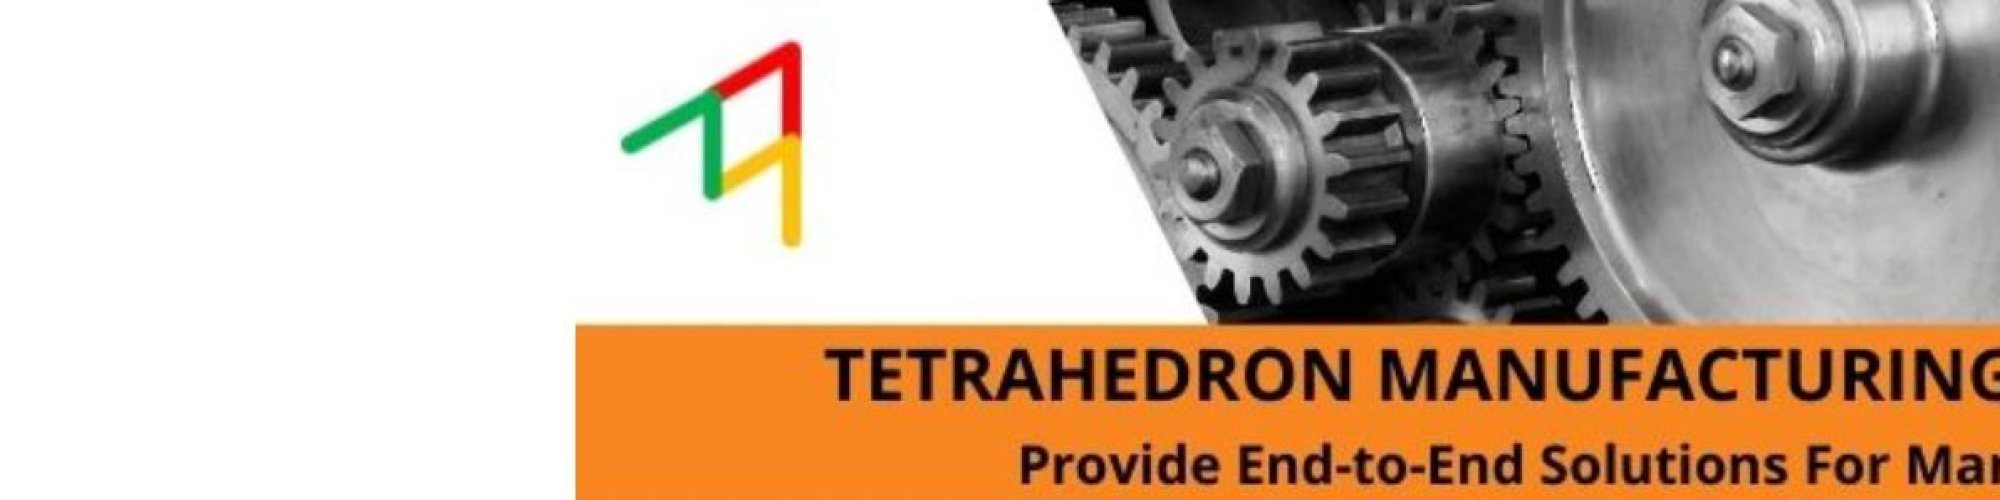 Tetrahedron Manufacturing Services